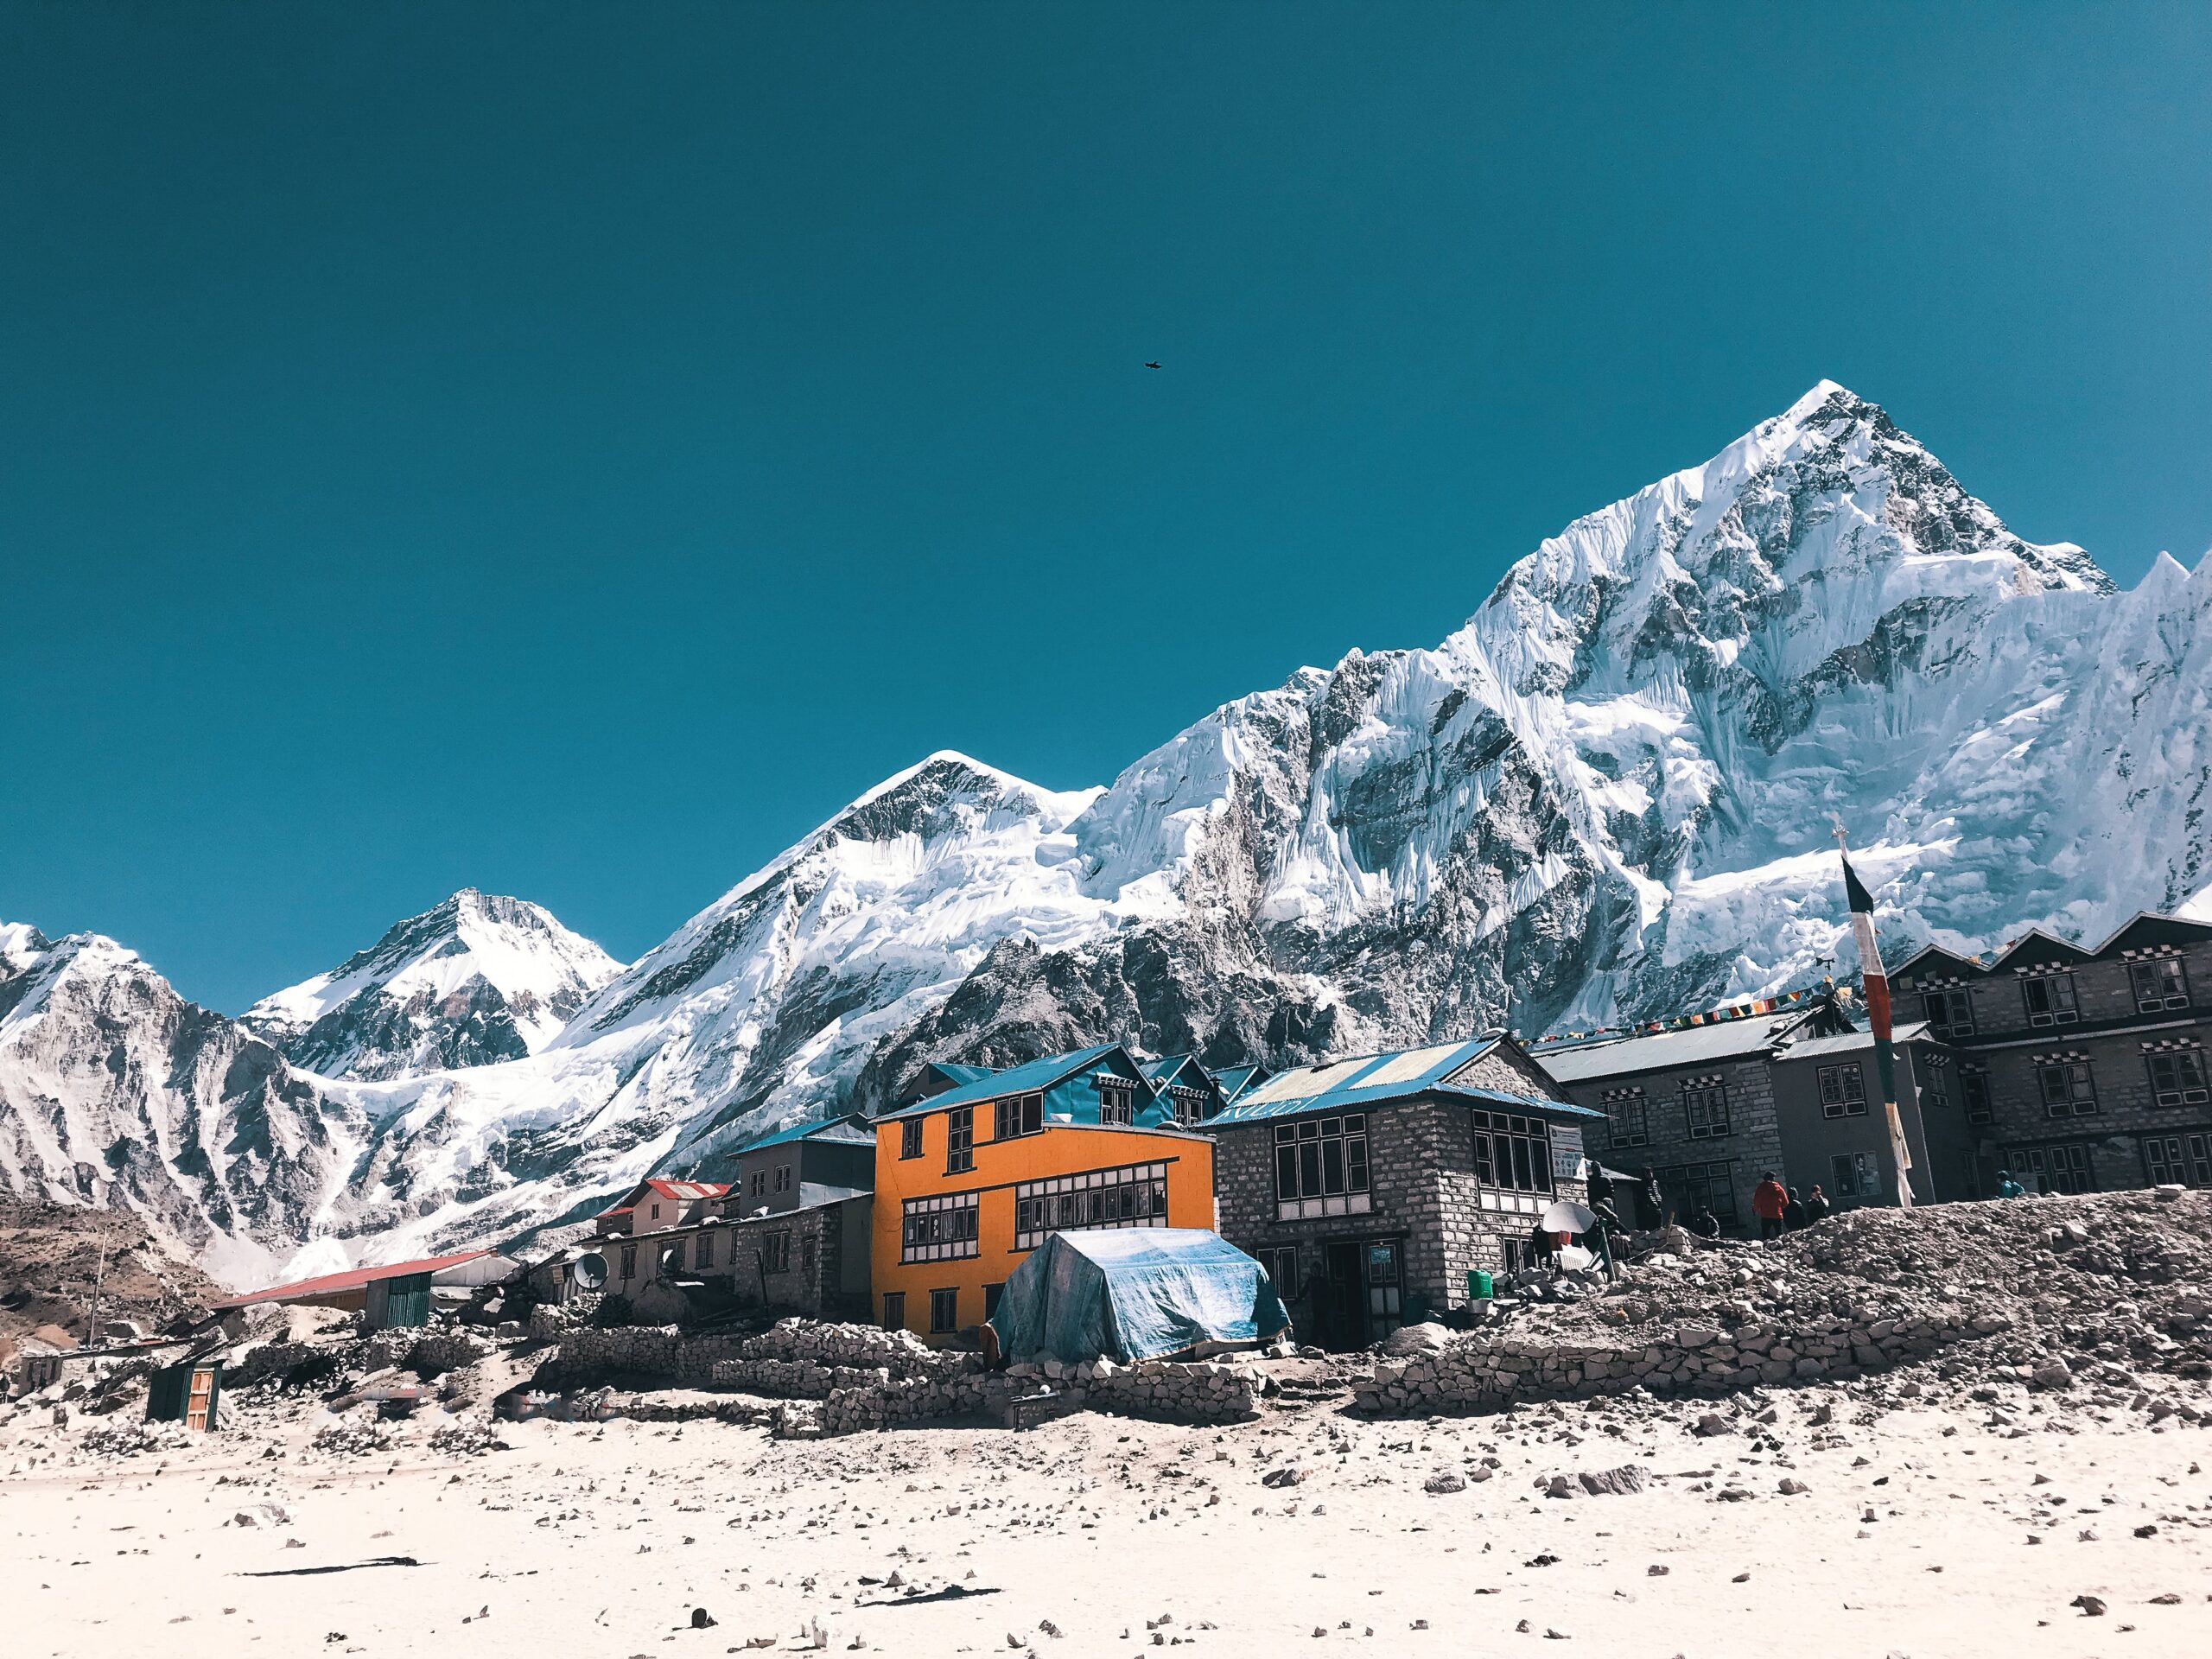 Luxury Everest Base Camp Trek – fly in and fly out by Heli